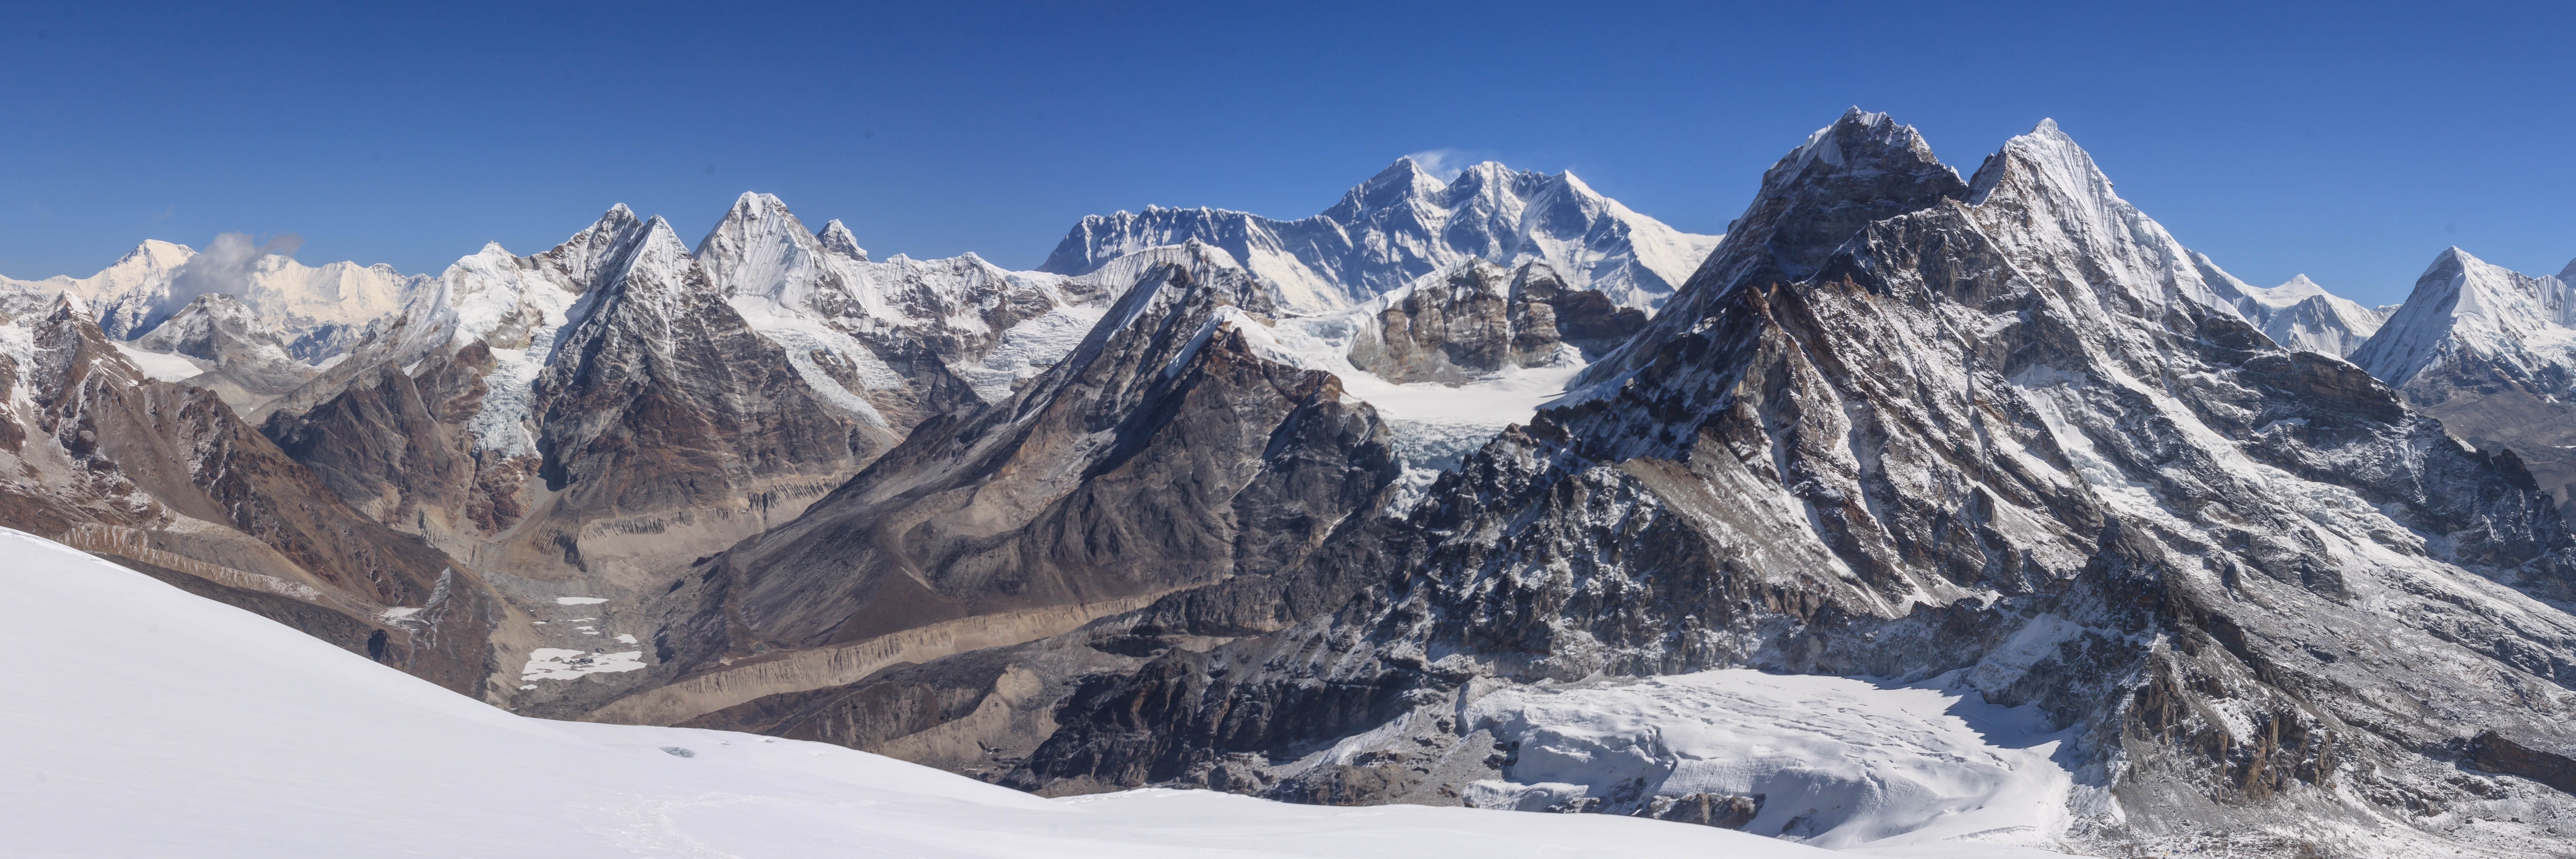 Mount Everest from the Mera Glacier